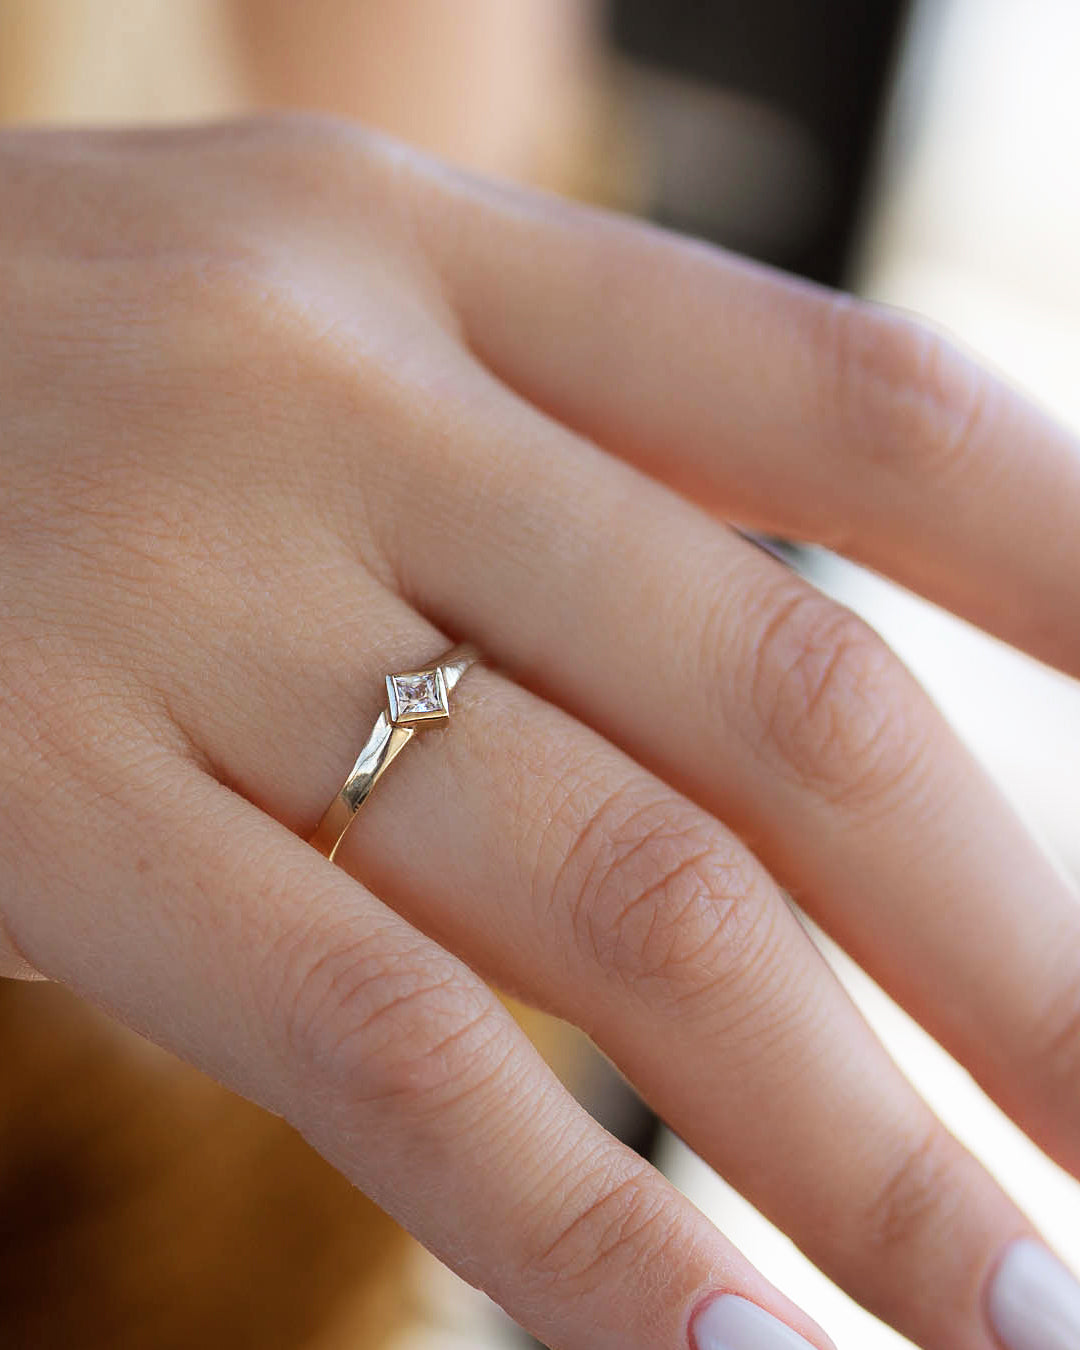 A delicate 14k yellow gold engagement ring set with a center 0.25 carat princess cut white diamond. 